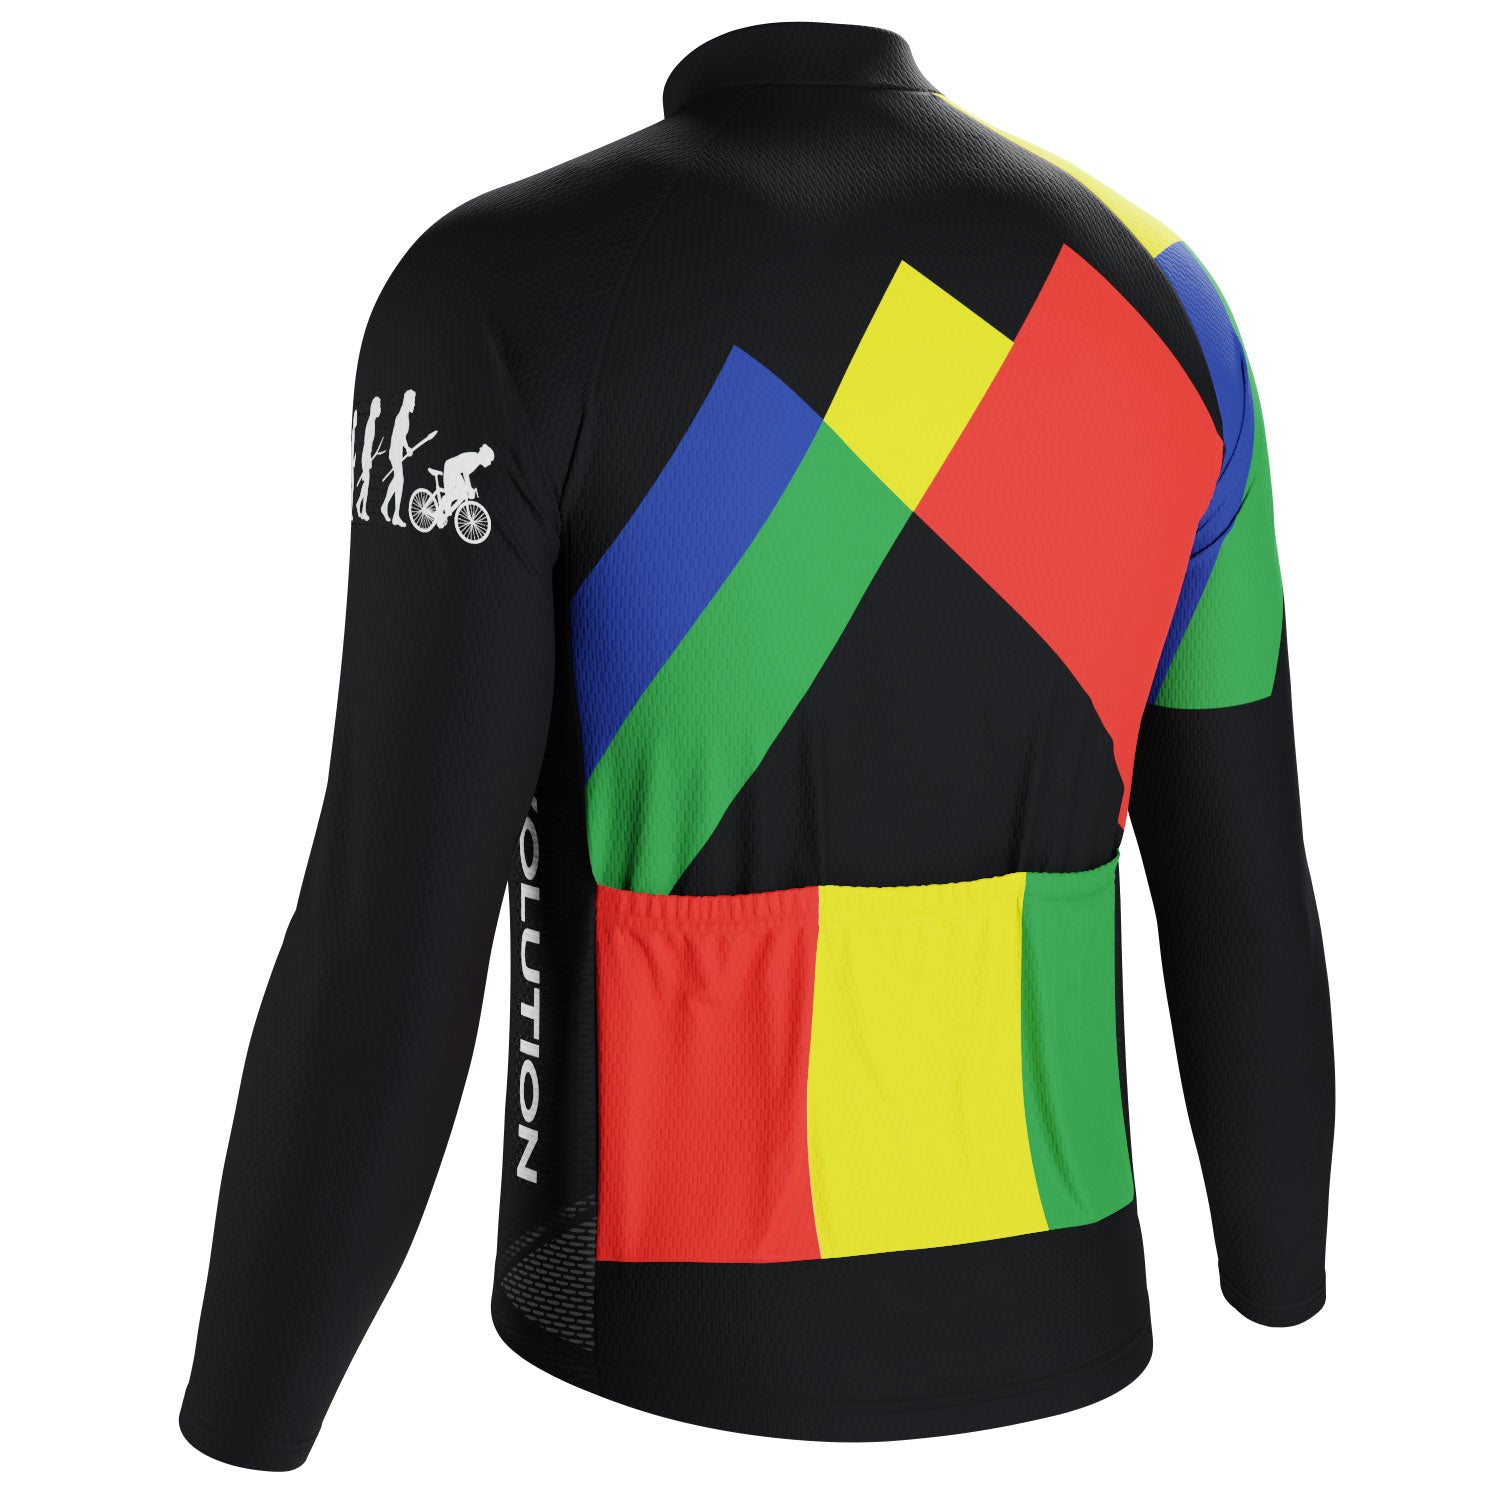 Men's Evolution of Man Long Sleeve Cycling Jersey